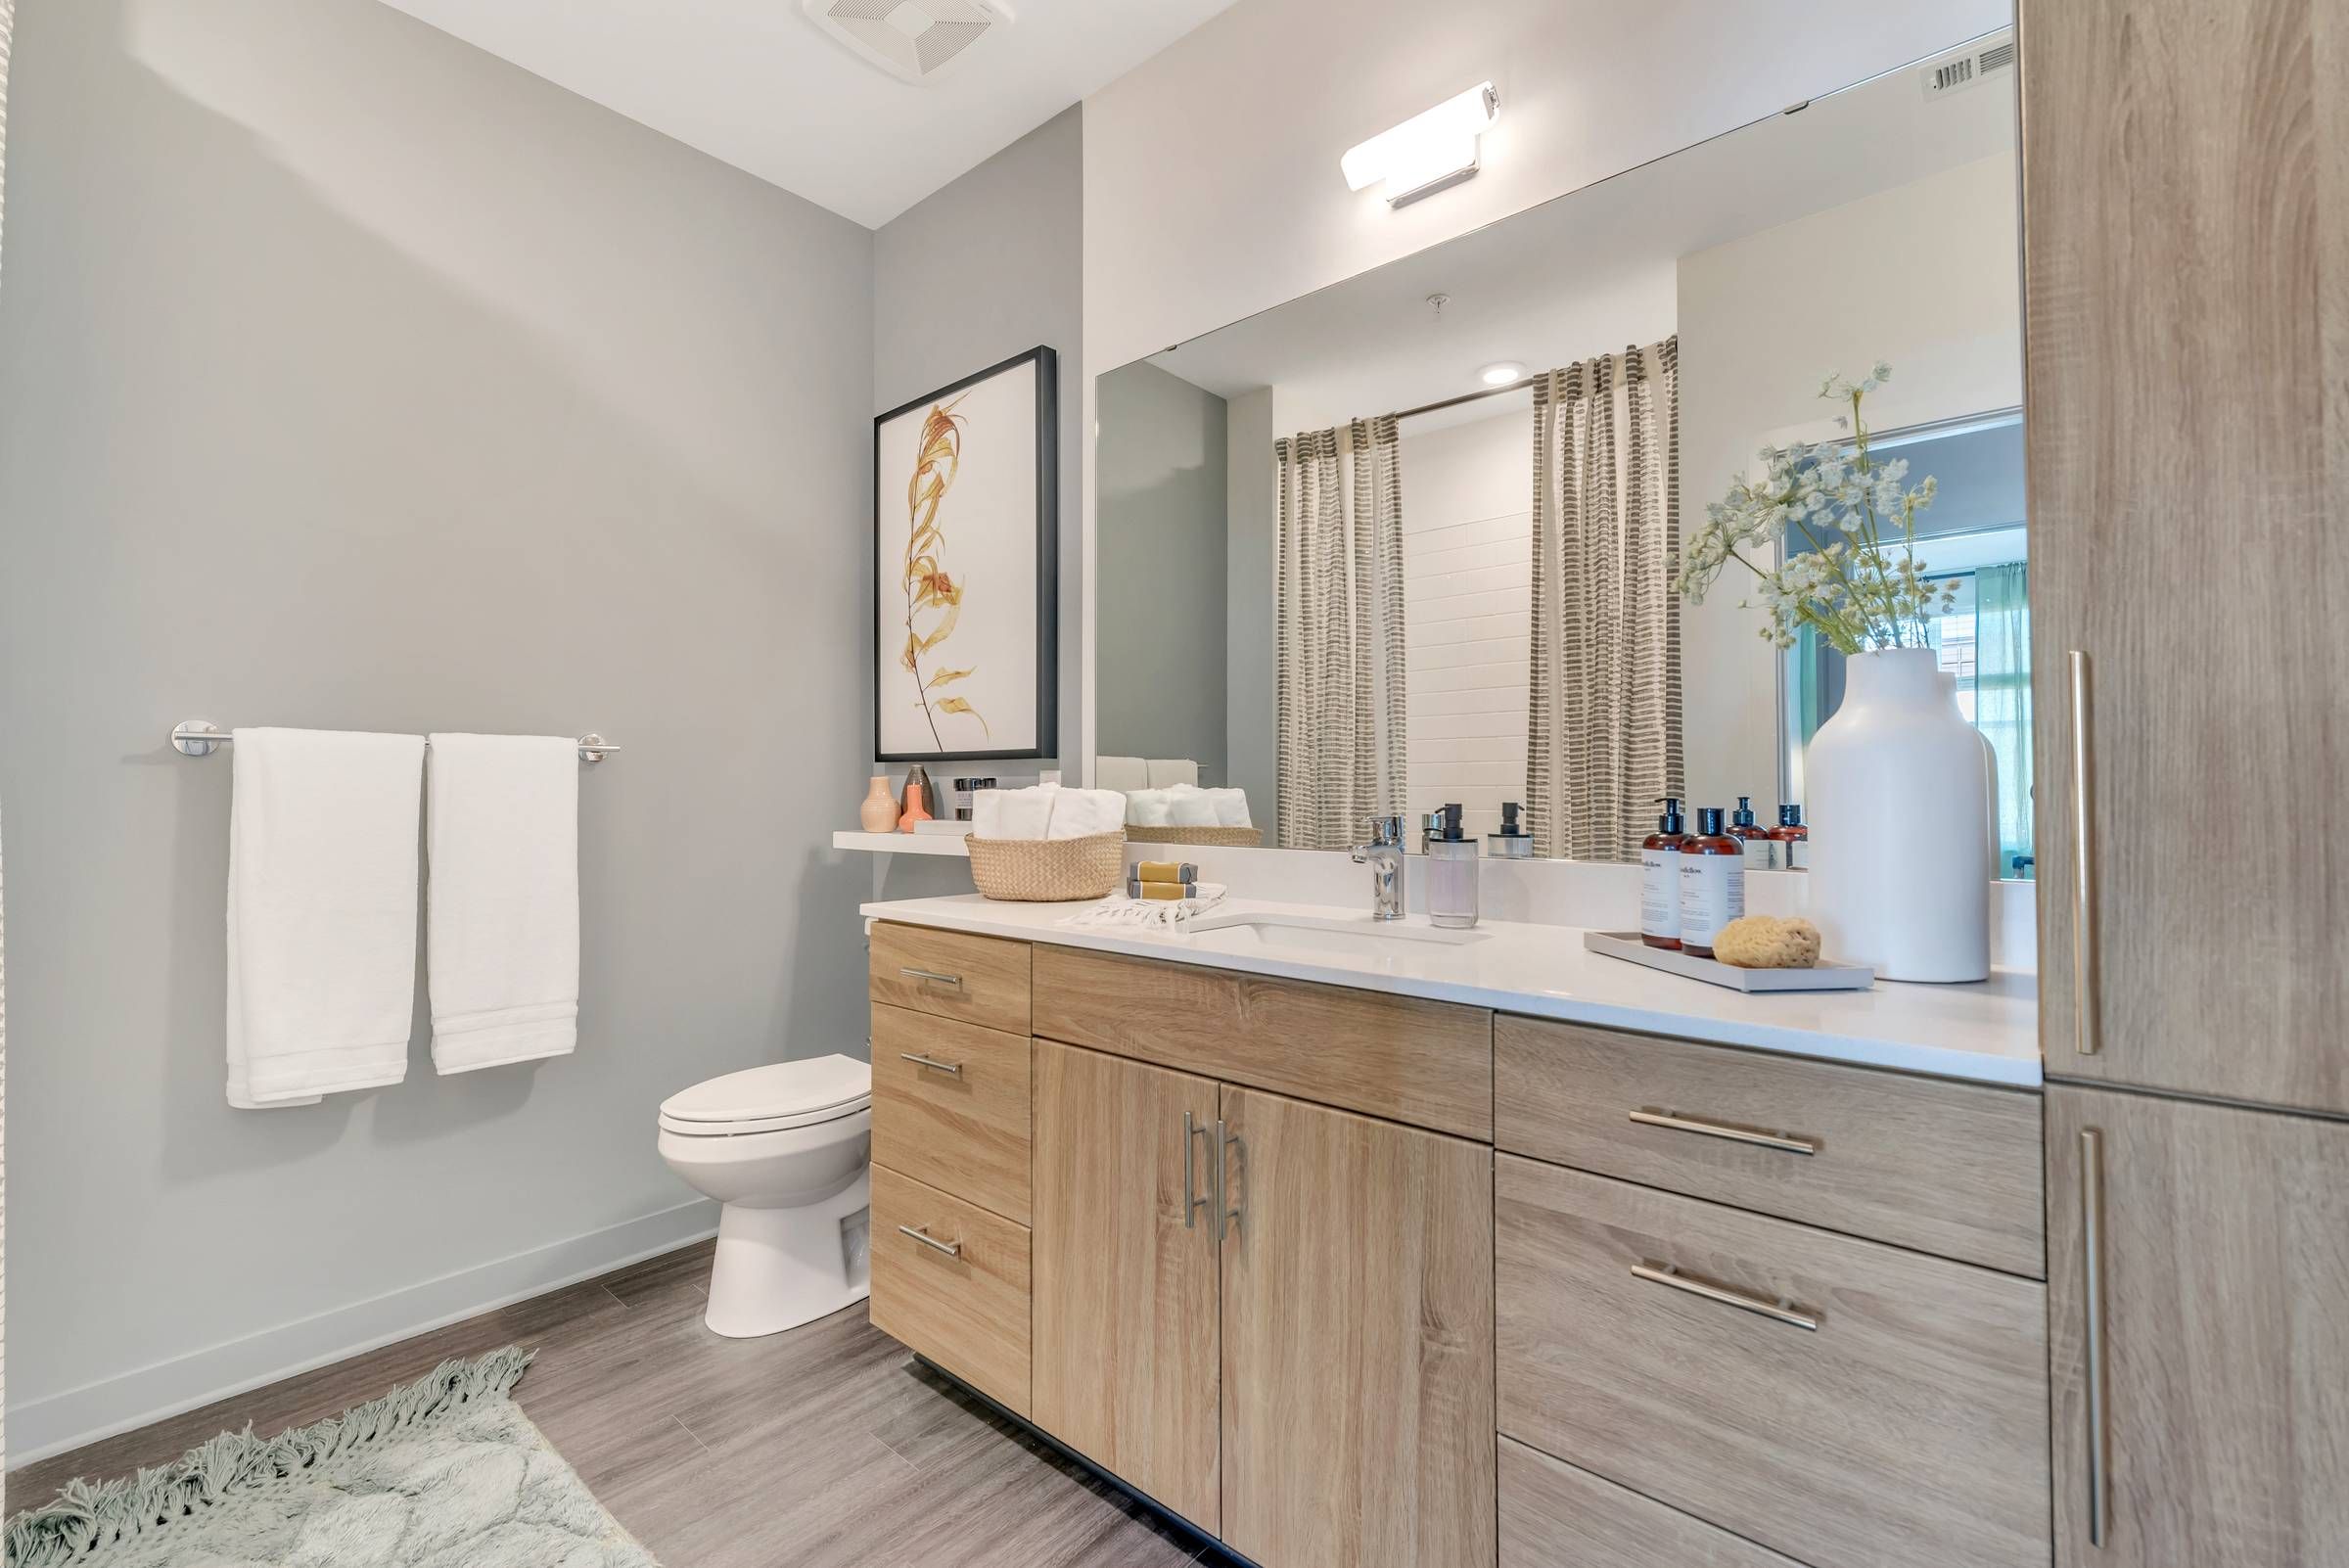 Alta Purl bathroom with ample cabinet space and chic wood finishes.